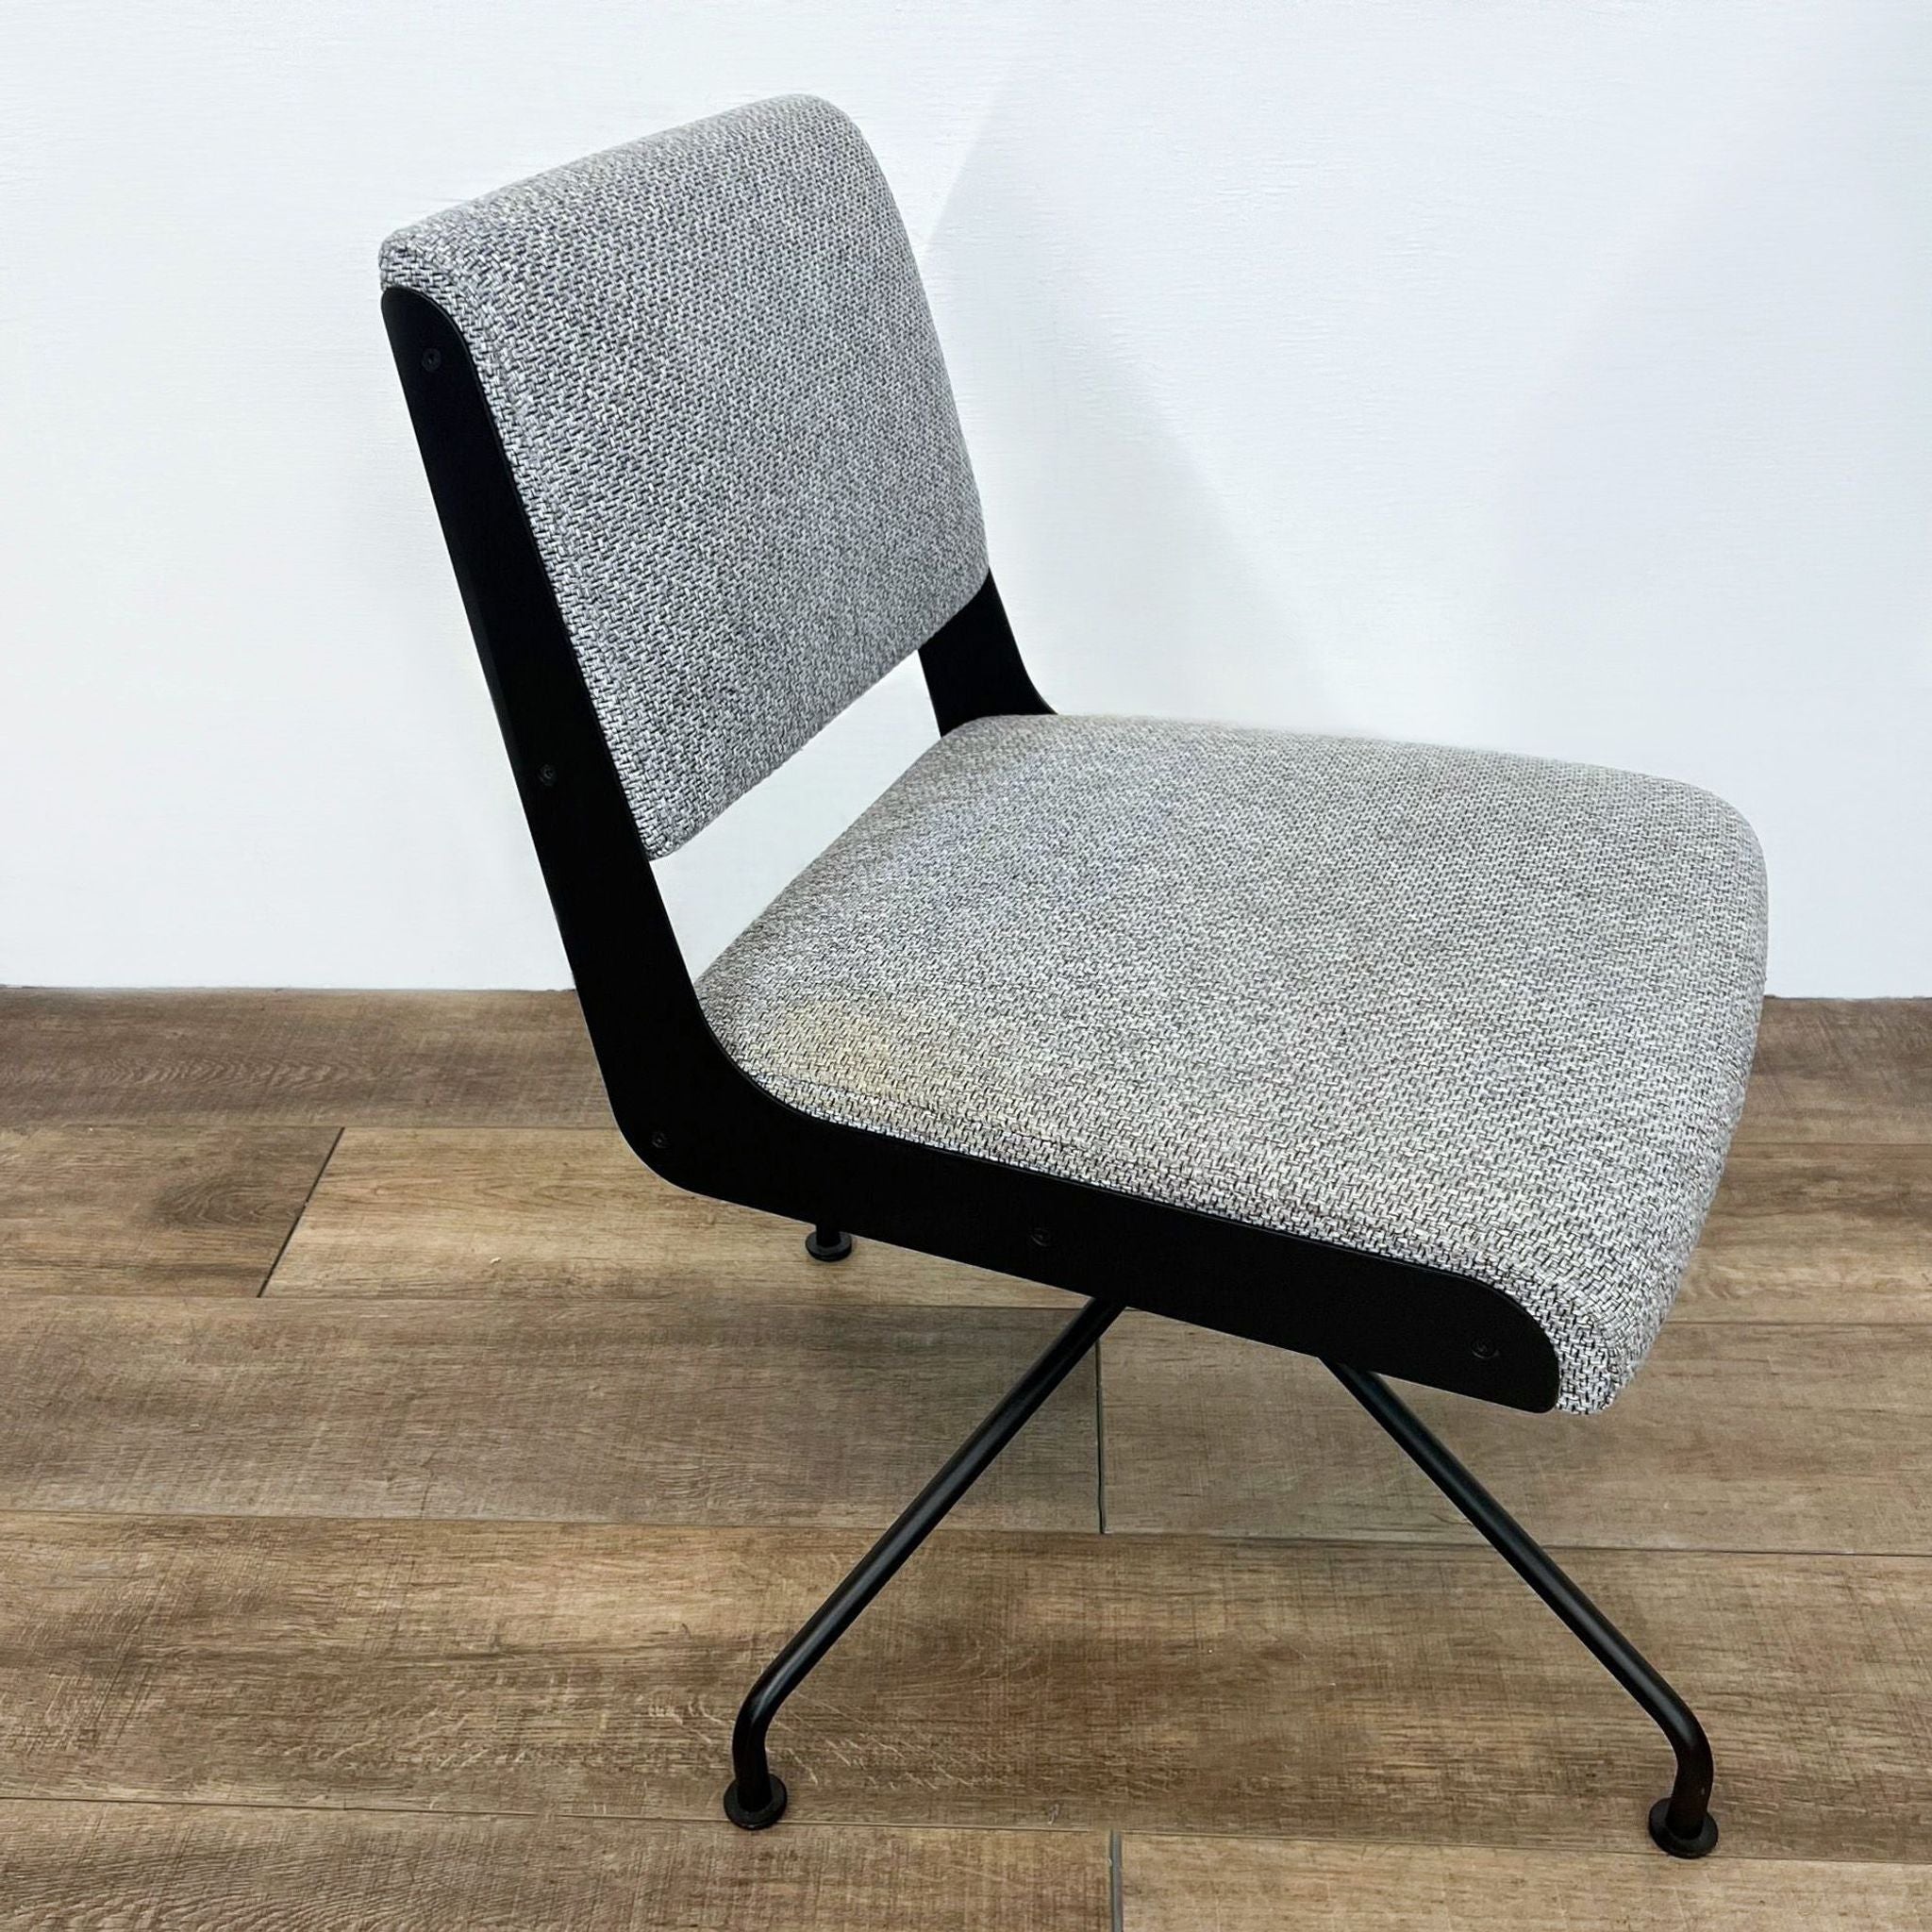 Gray tweed upholstered Rue Cambon chair by CB2, featuring a modern black metal frame and swivel base, against a white wall.